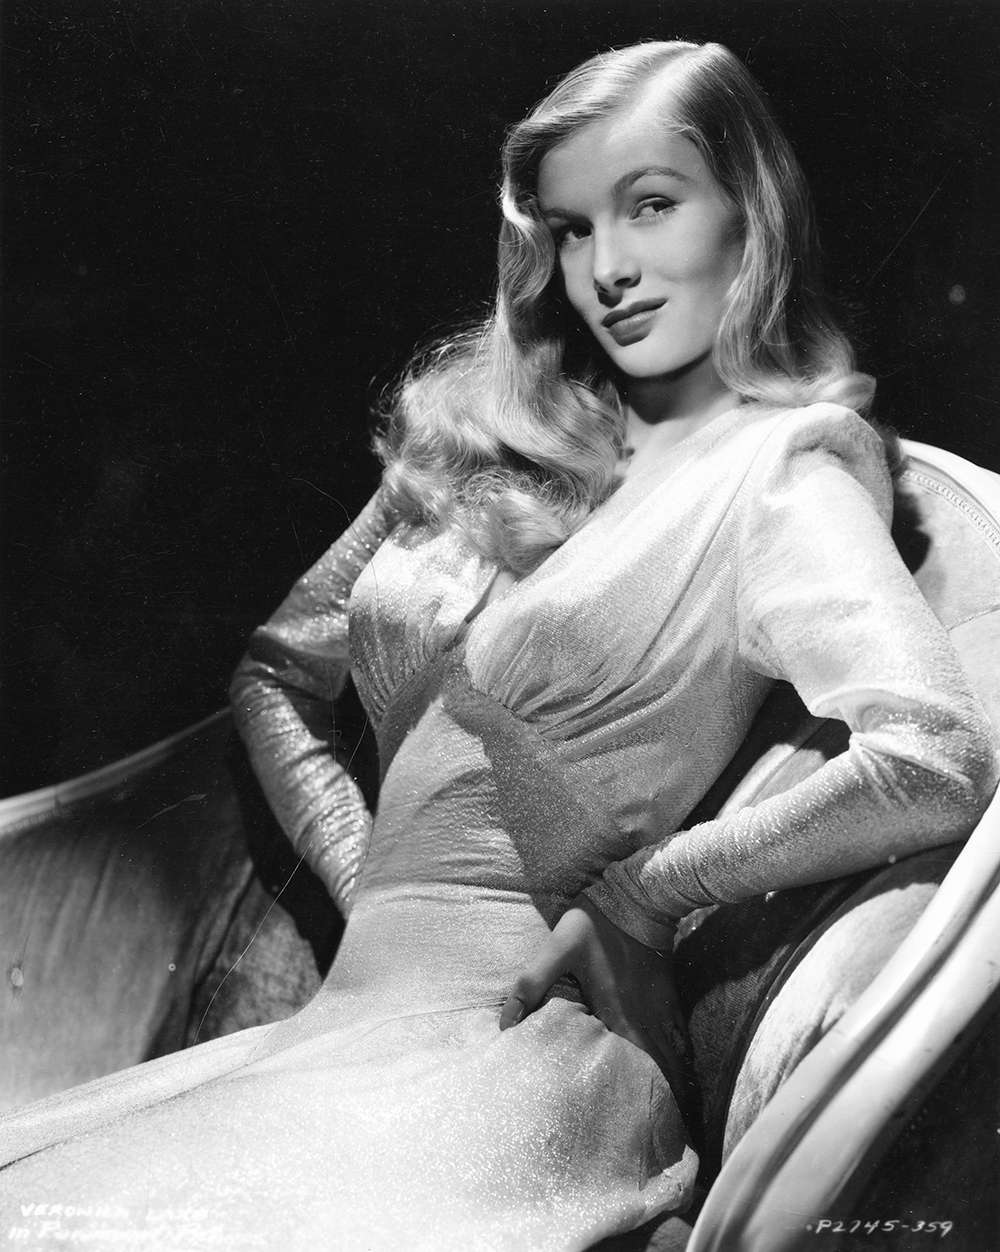 Veronica Lake, former '40s Hollywood star, appeared 'very damaged' in her later years